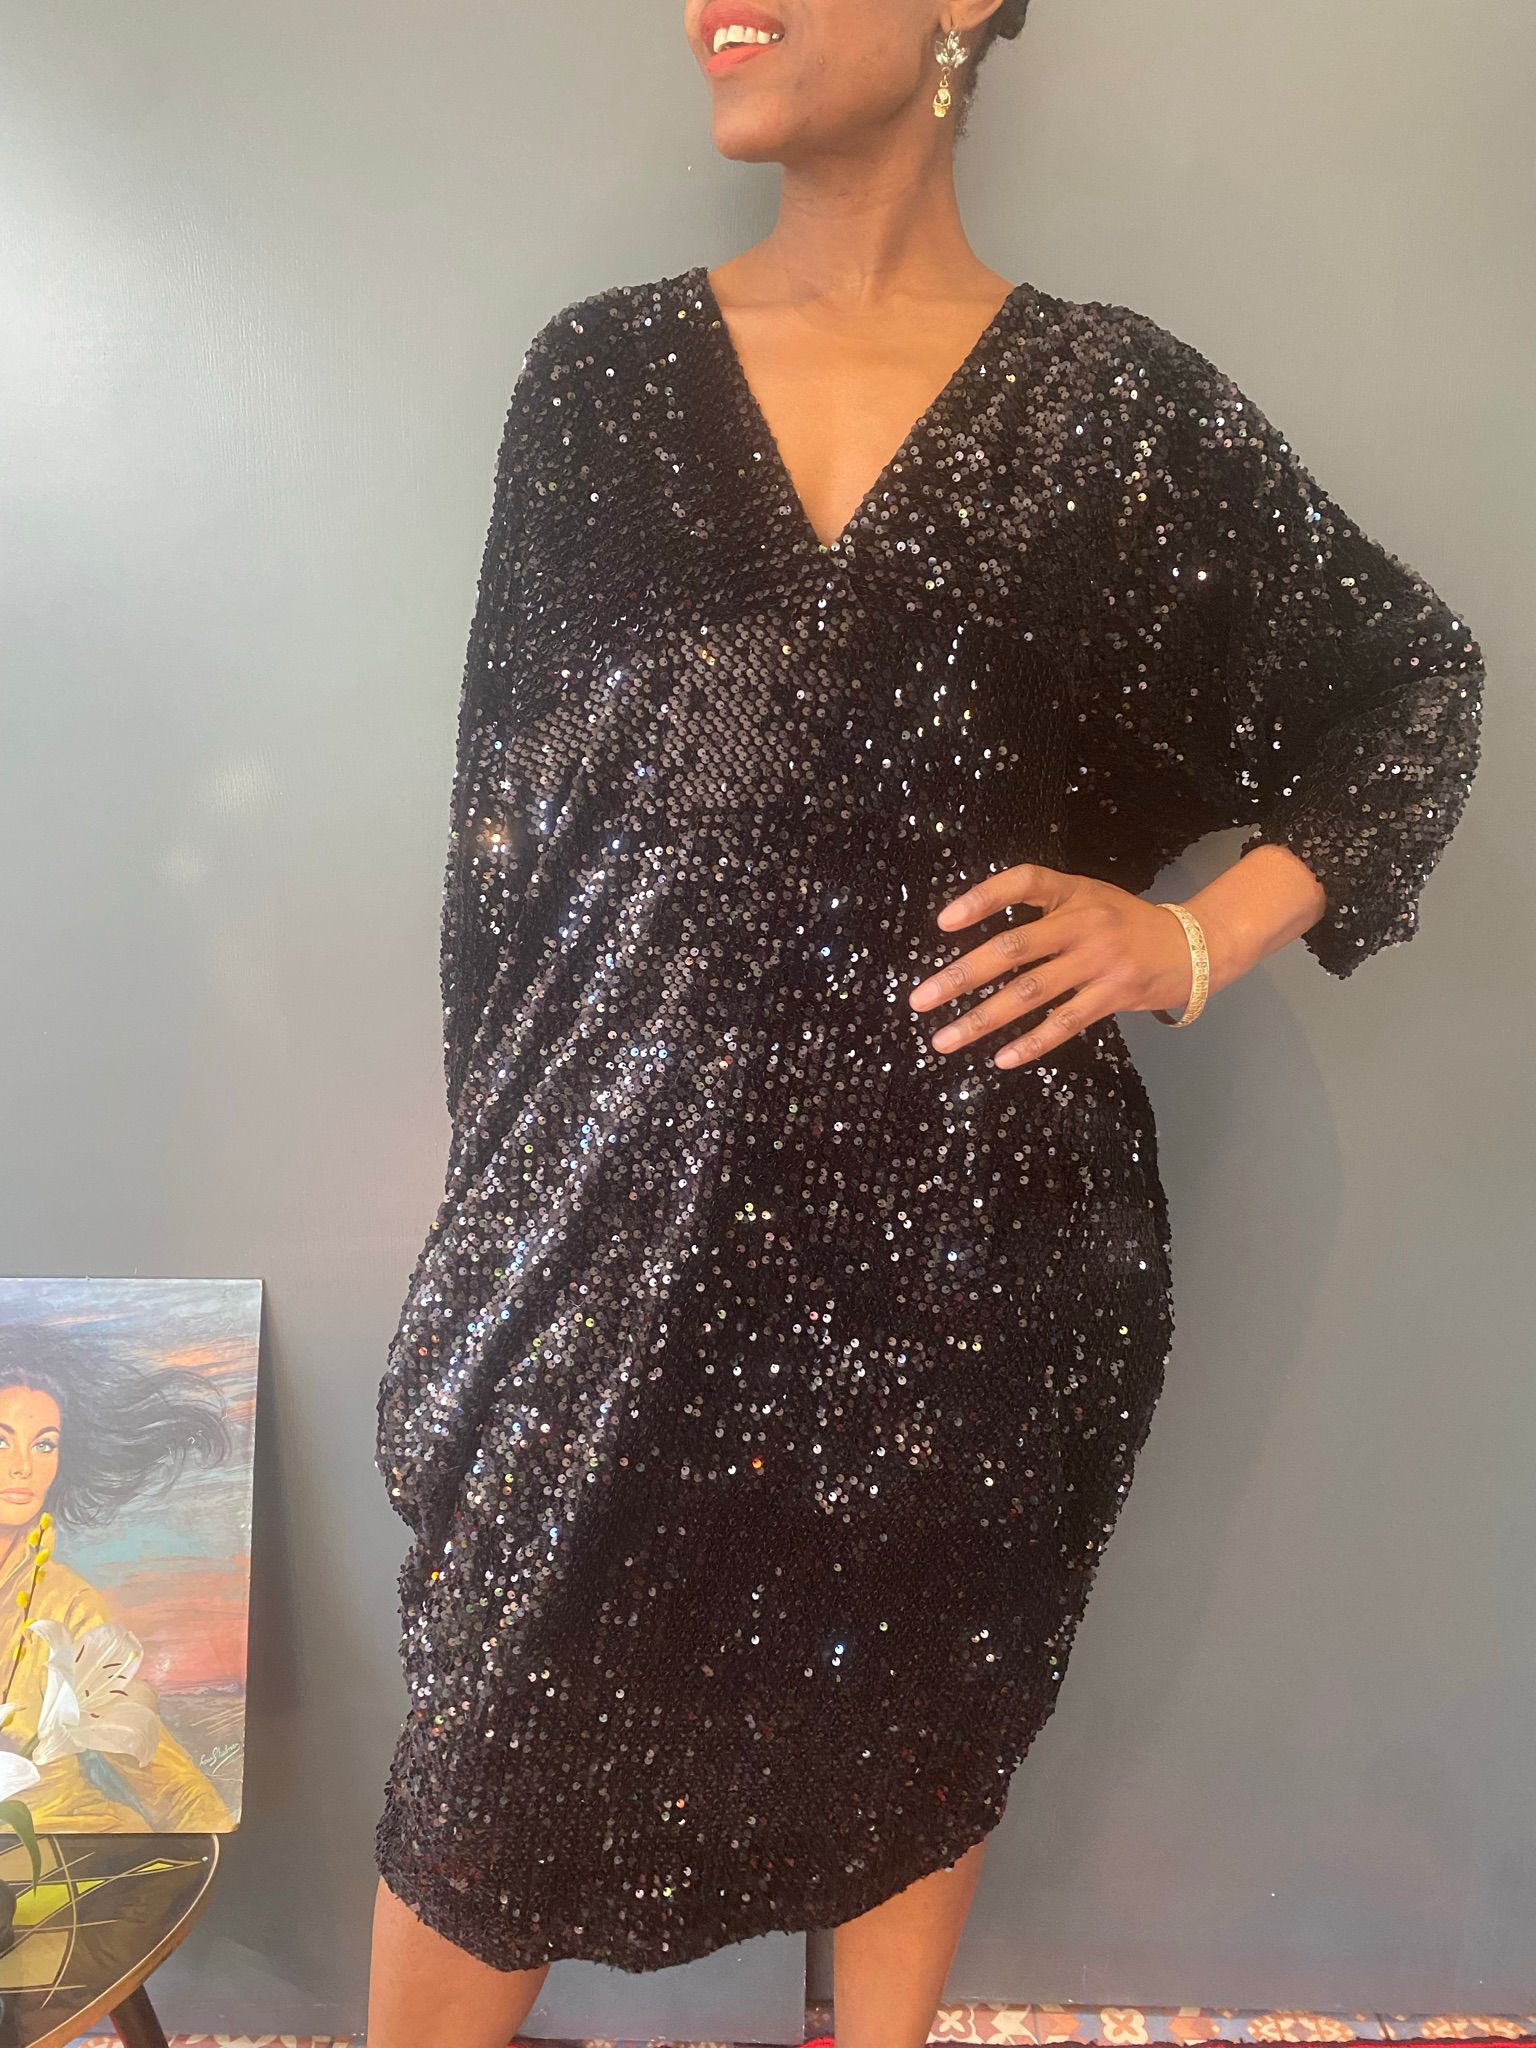 NEW! Sally’s Mum's Dress 1980's Inspired - Limited Edition Black Sequins